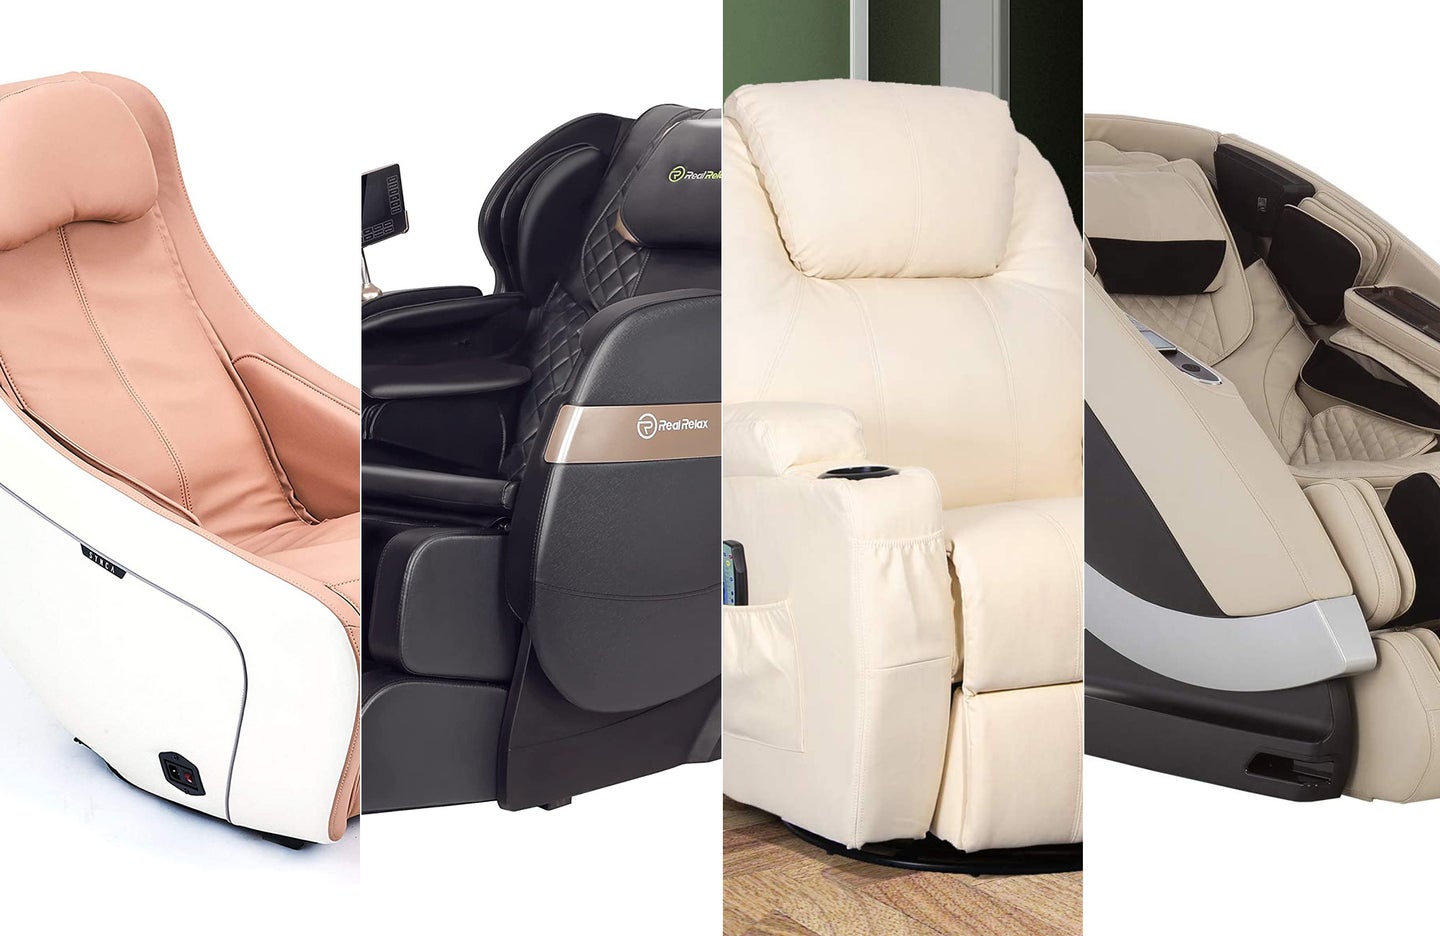 The best massage chairs in a collage